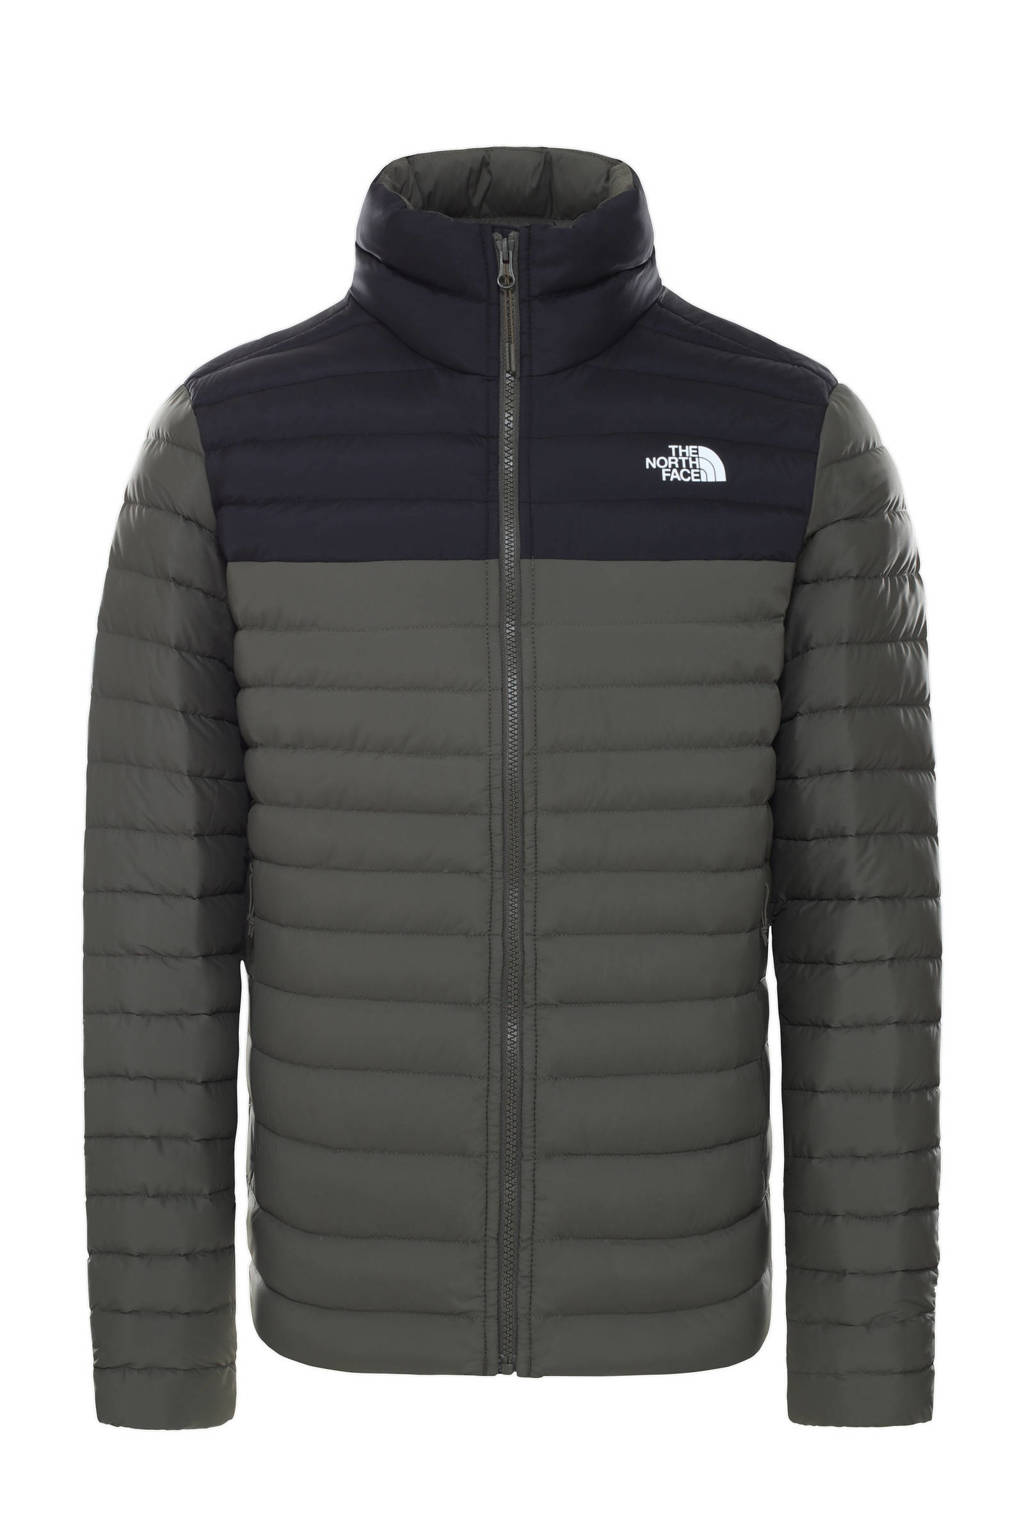 The North Face  jas Stretch Down Jacket taupe groen, Taupe groen